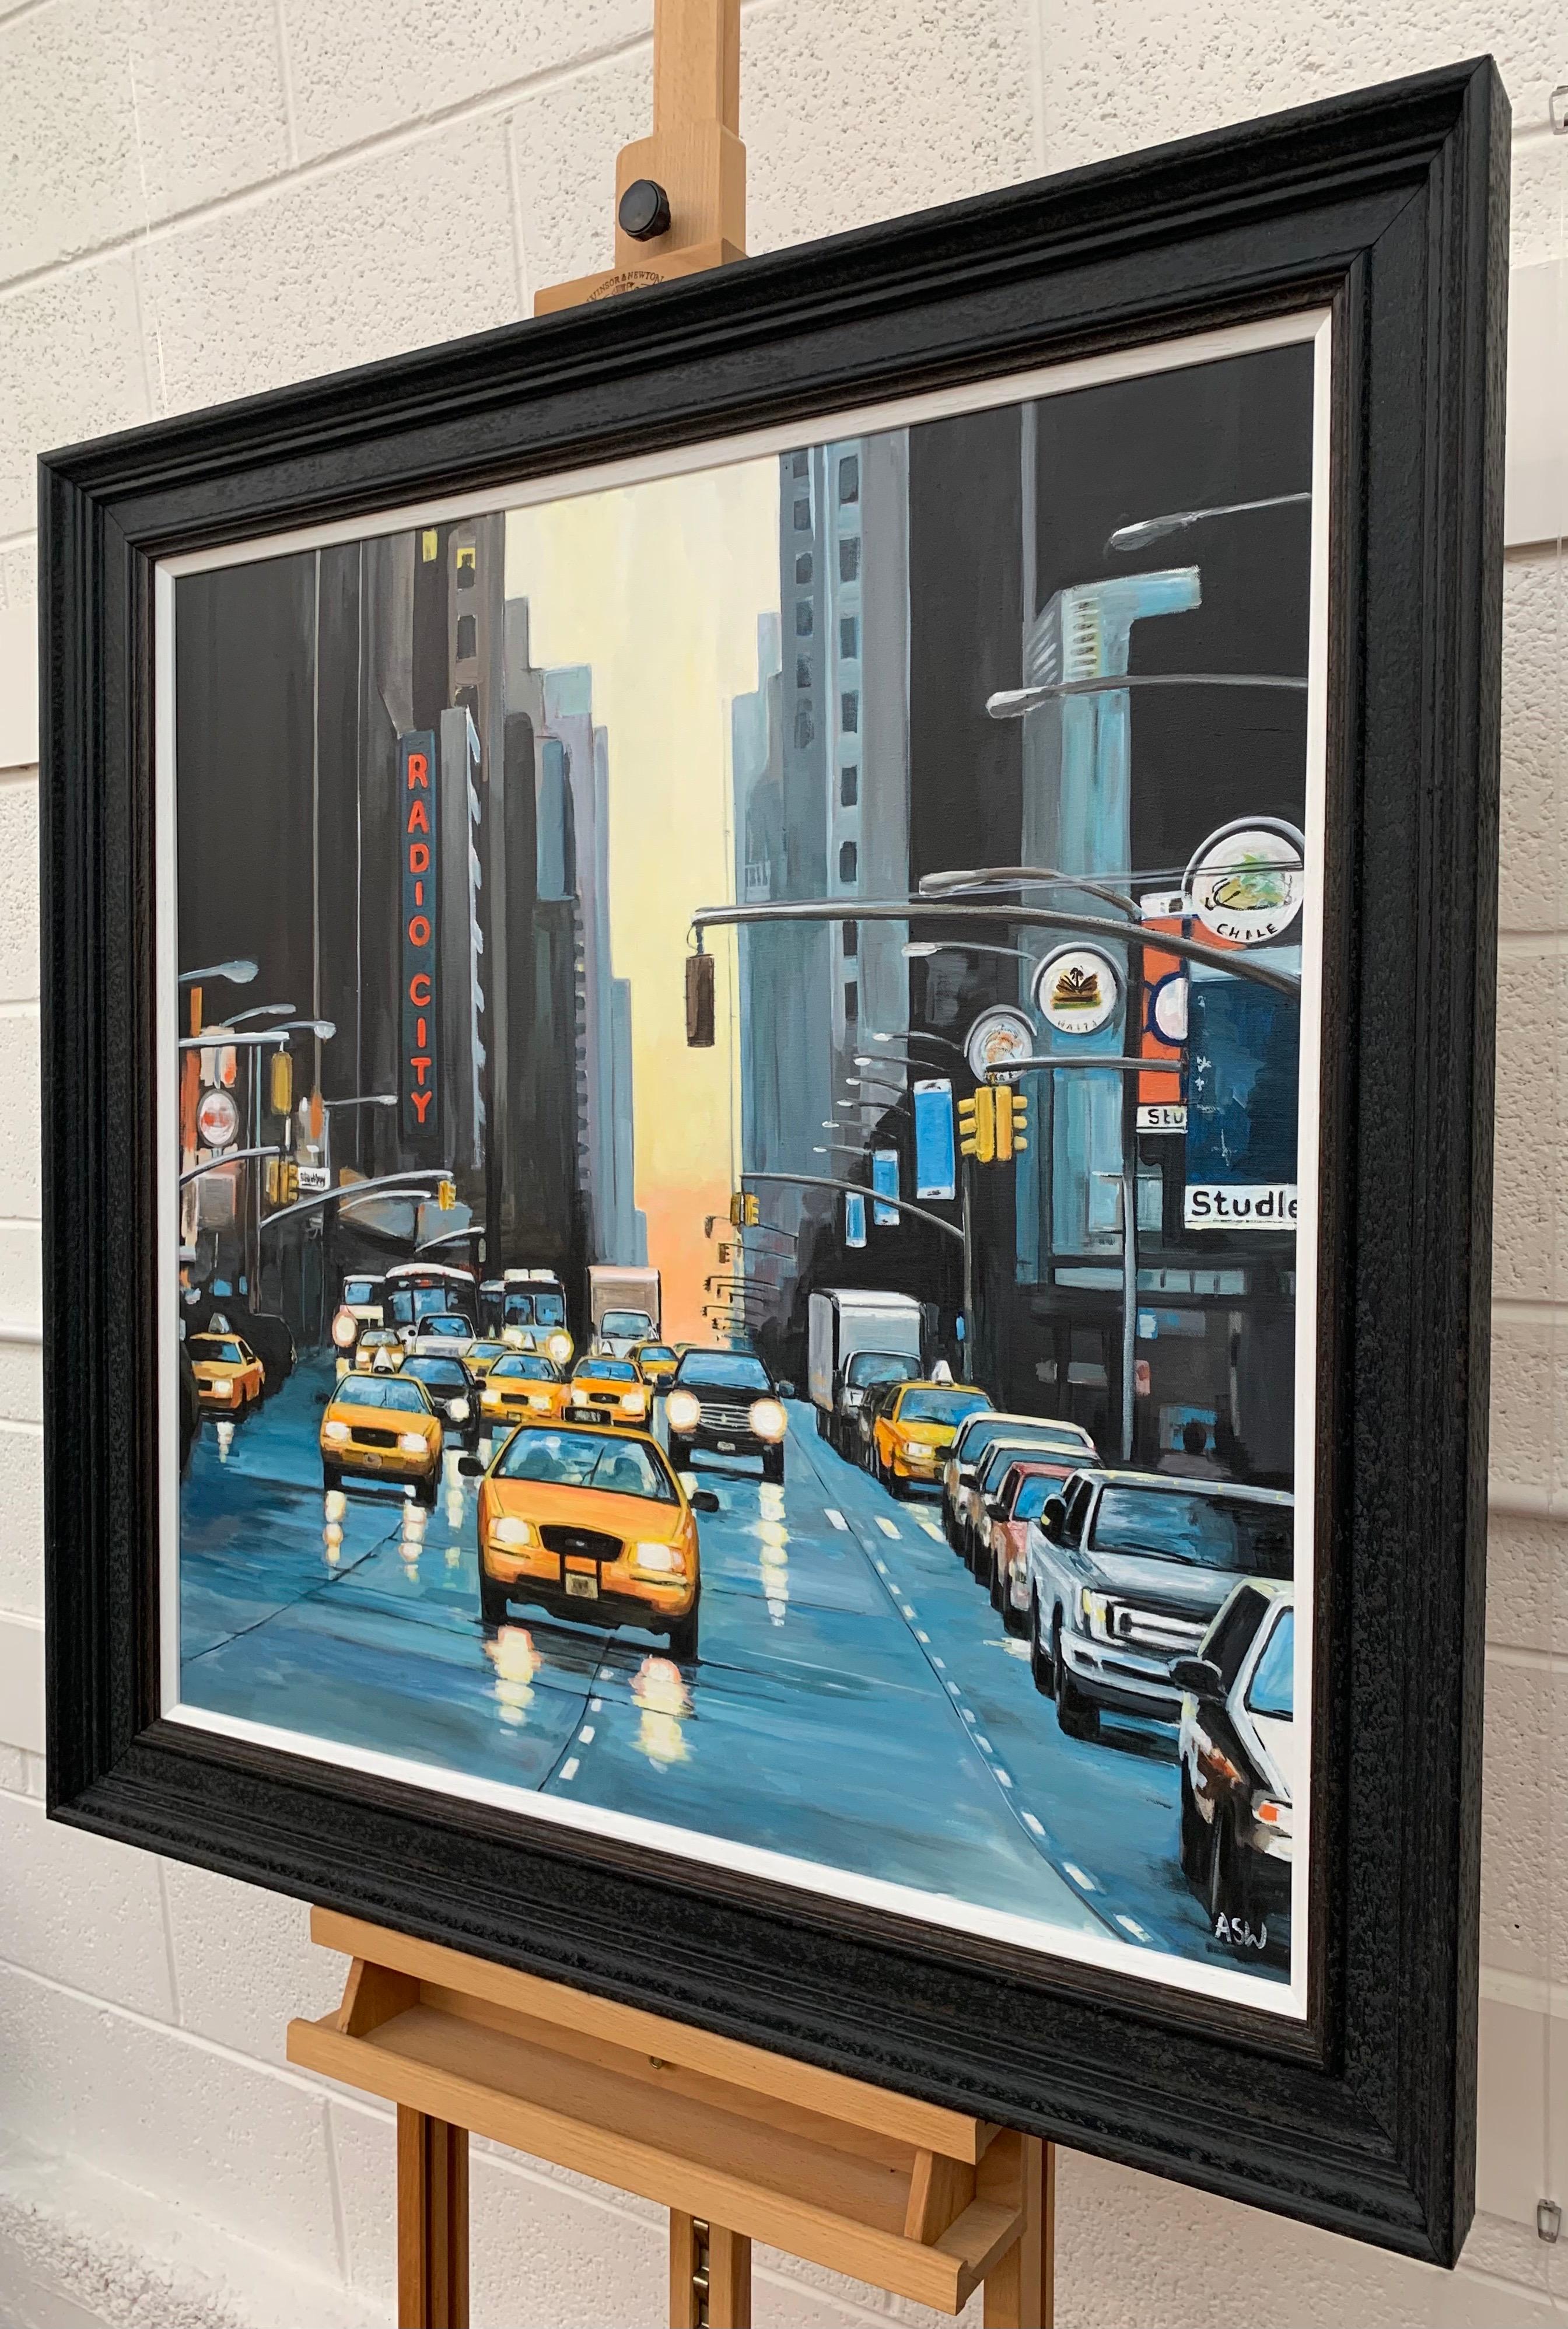 Radio City New York NYC Sunset by Contemporary British Urban Landscape Artist Angela Wakefield

Art measures 31.5 x 31.5 inches 
Frame measures 36.5 x 36.5 inches 

Wakefield's work is a unique blend of abstraction and realism, with a strong